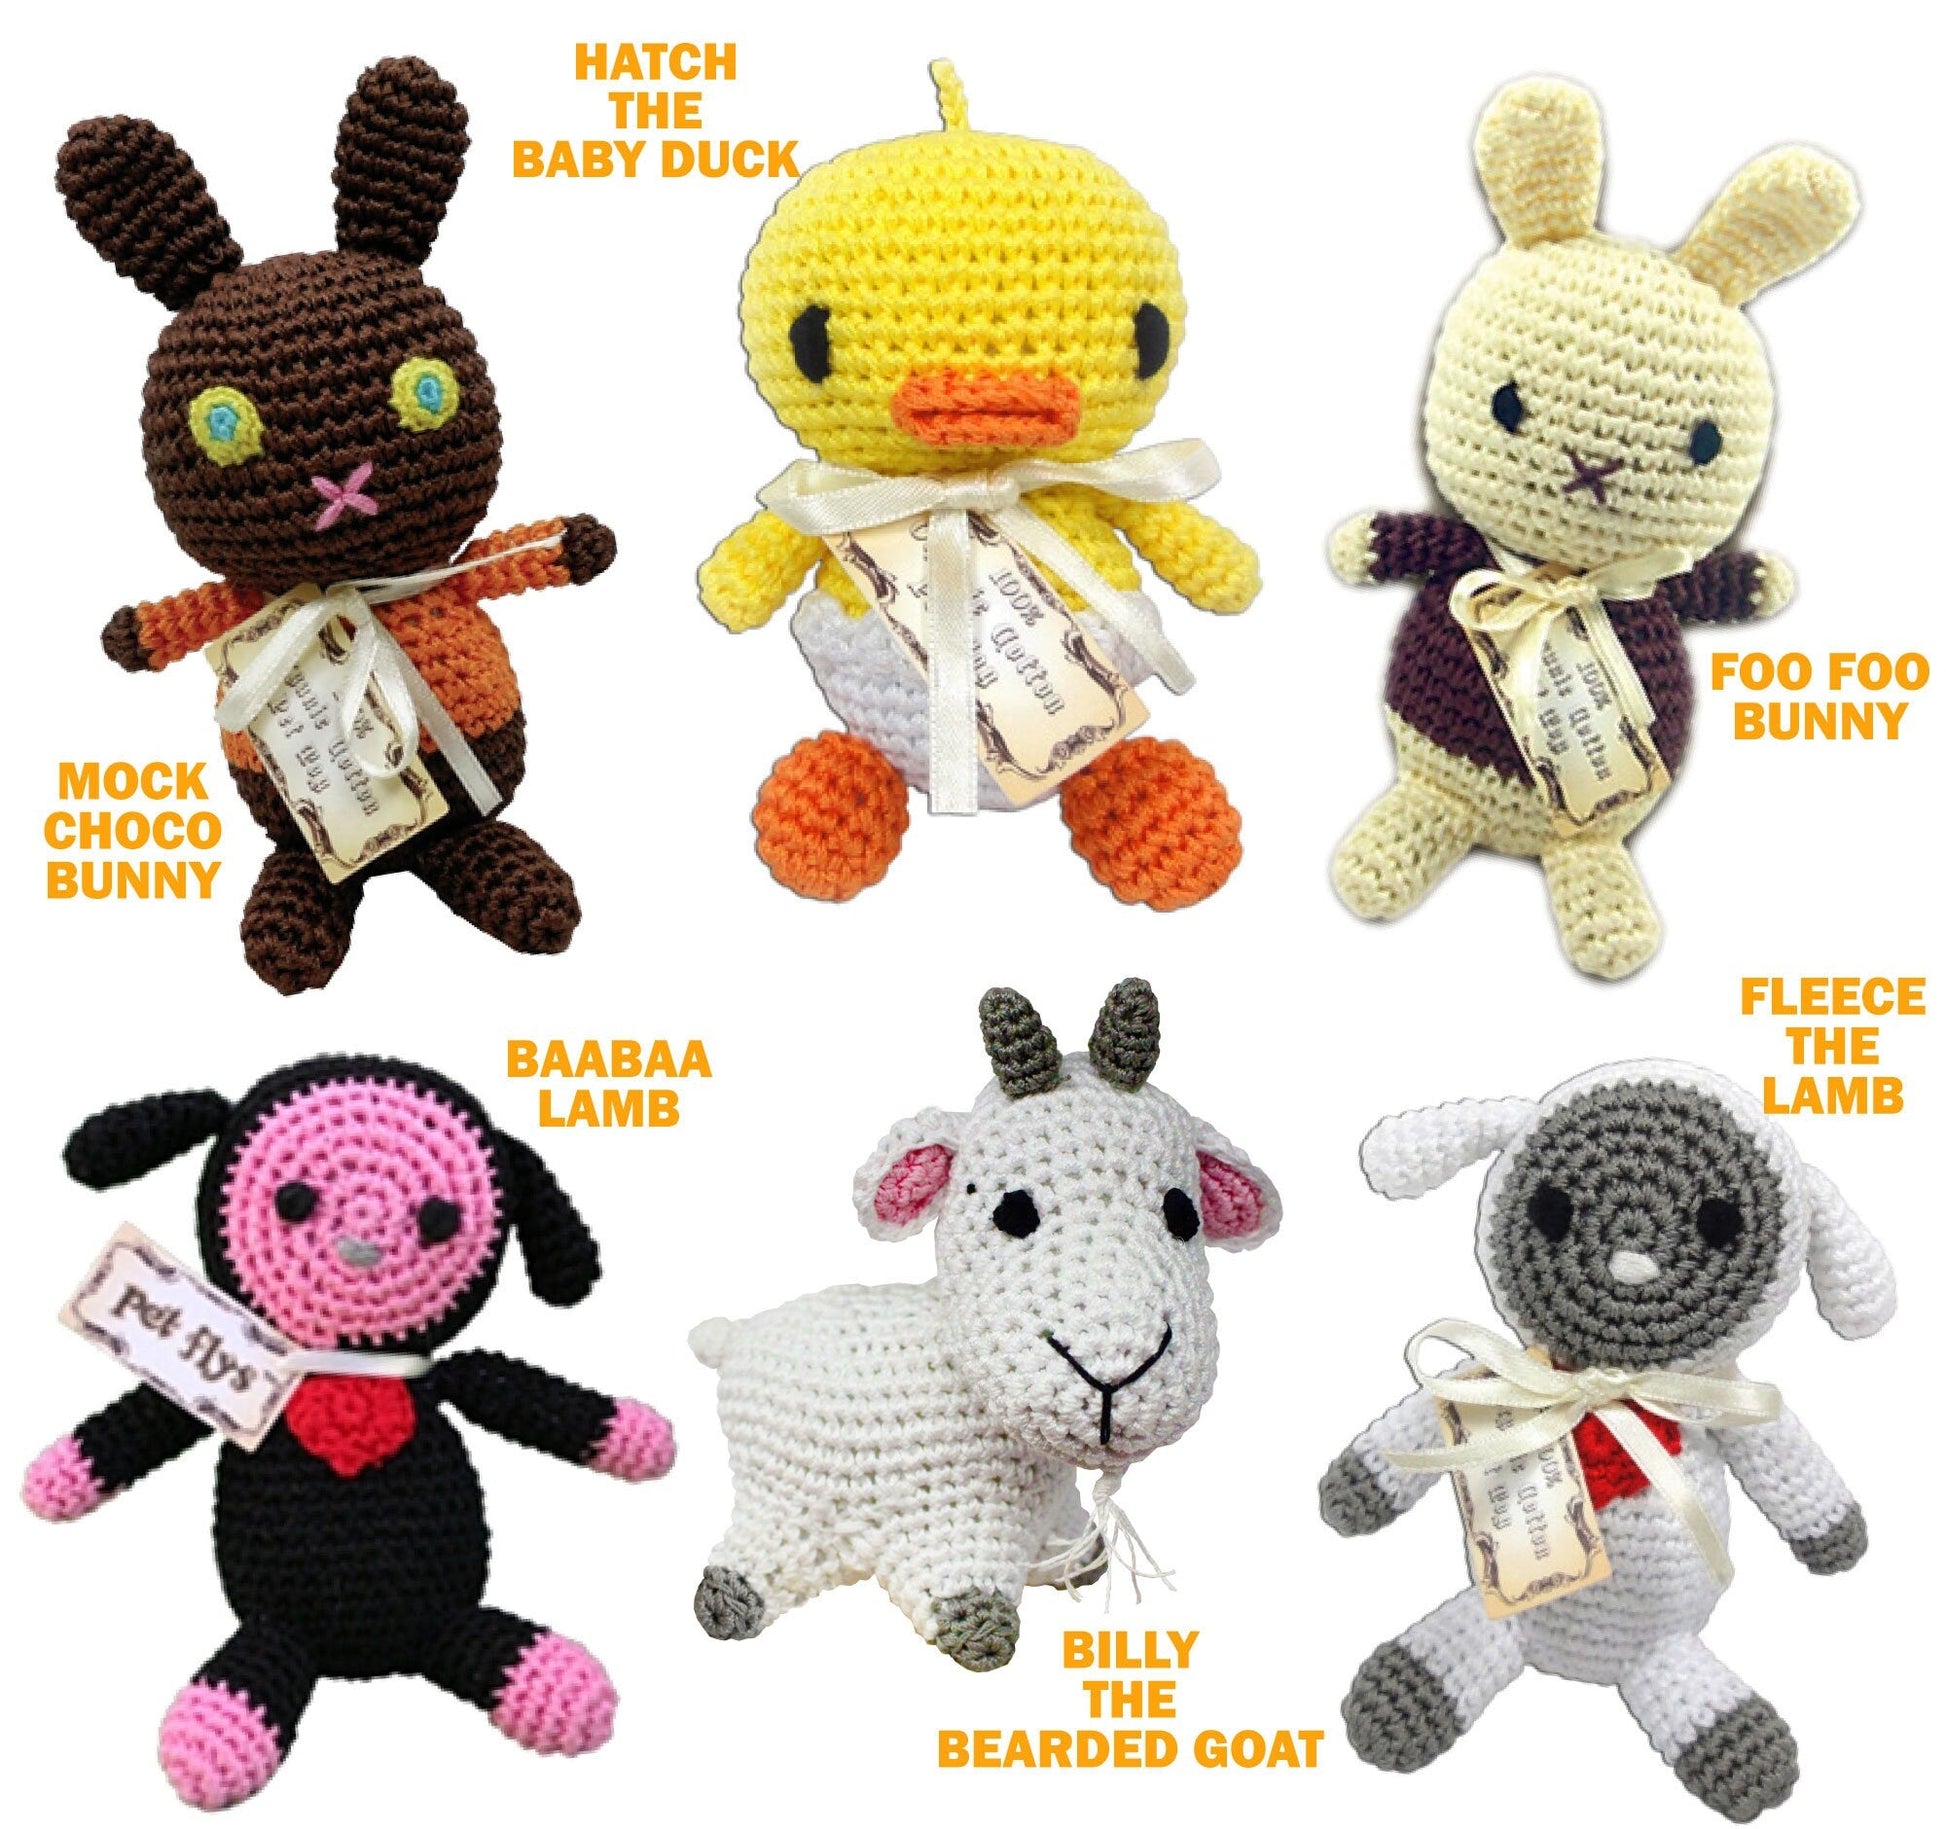 Knit Knacks Organic Cotton Pet & Dog Toys, "Easter Group" (Choose from: Choco Bunny, Foo Foo Bunny, Baby Duck, 2 Different Lambs, or Goat)-1